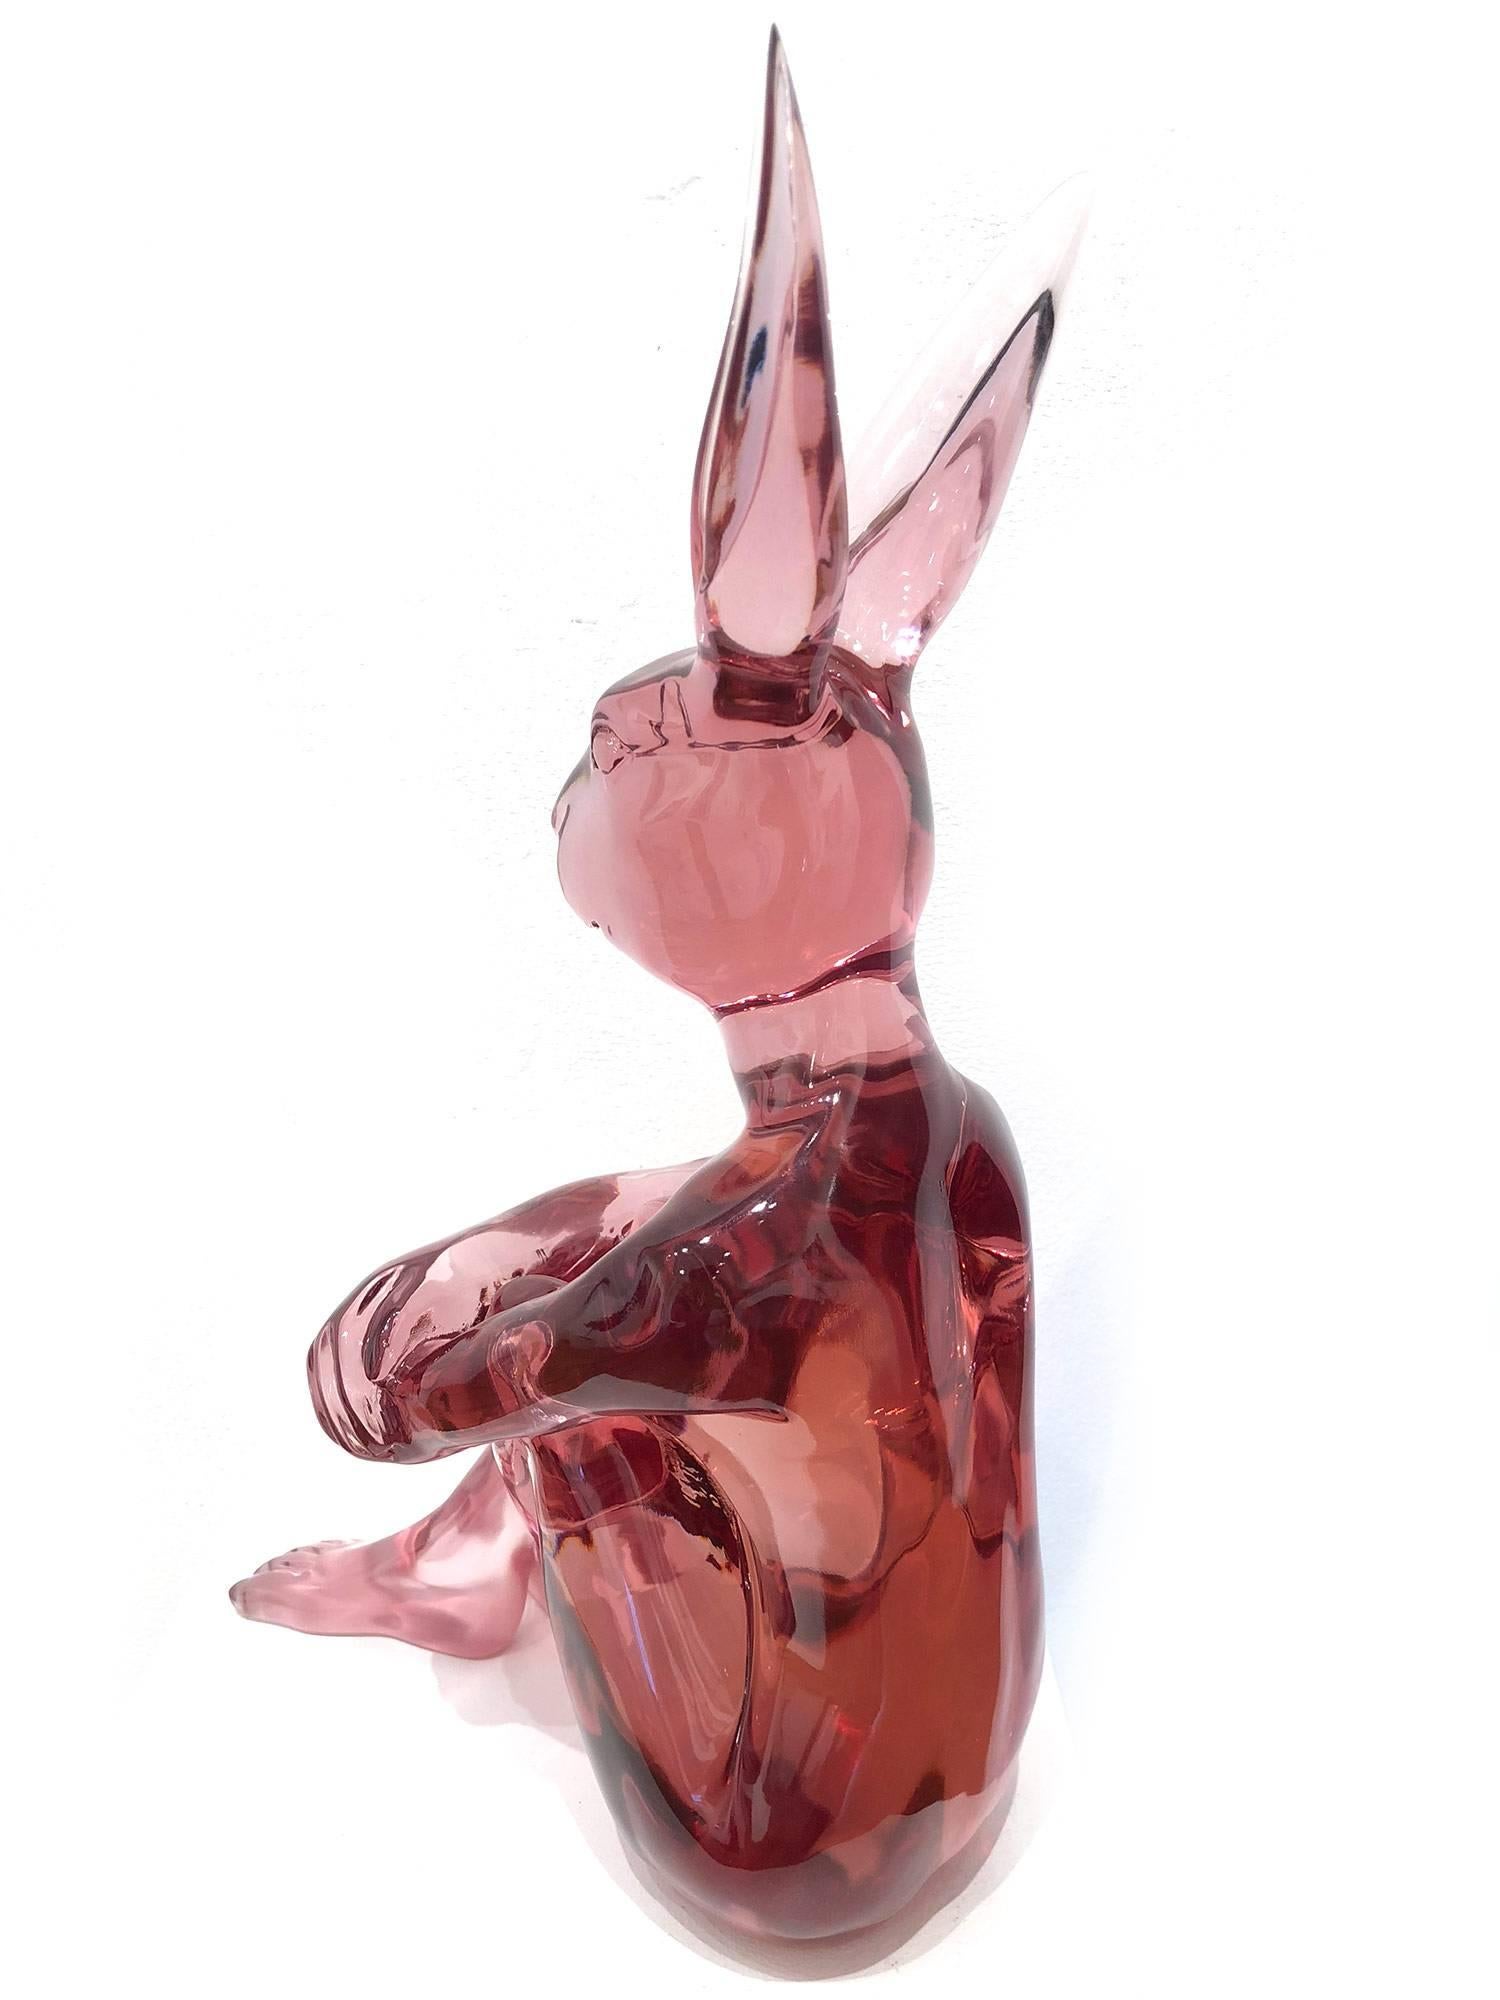 A whimsical yet very strong piece depicting the Rabbitgirl from Gillie and Marc's iconic figures of the Dog/Bunny Human Hybrid, which has picked up much esteem across the globe. Here we find Rabbitgirl sitting crossed legged in a bright and fun Pink